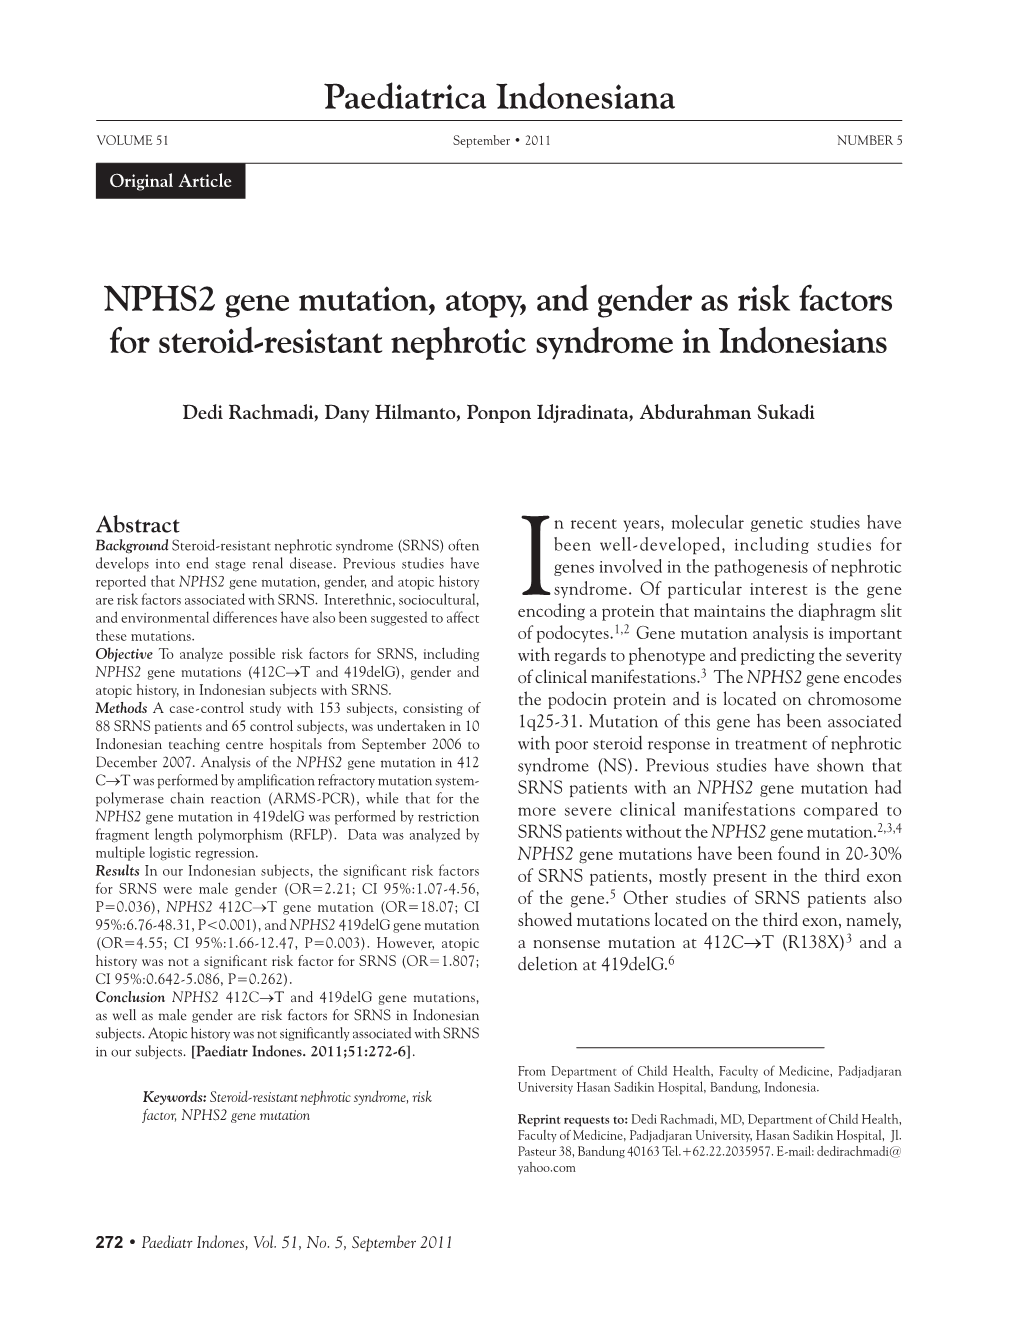 Paediatrica Indonesiana NPHS2 Gene Mutation, Atopy, and Gender As Risk